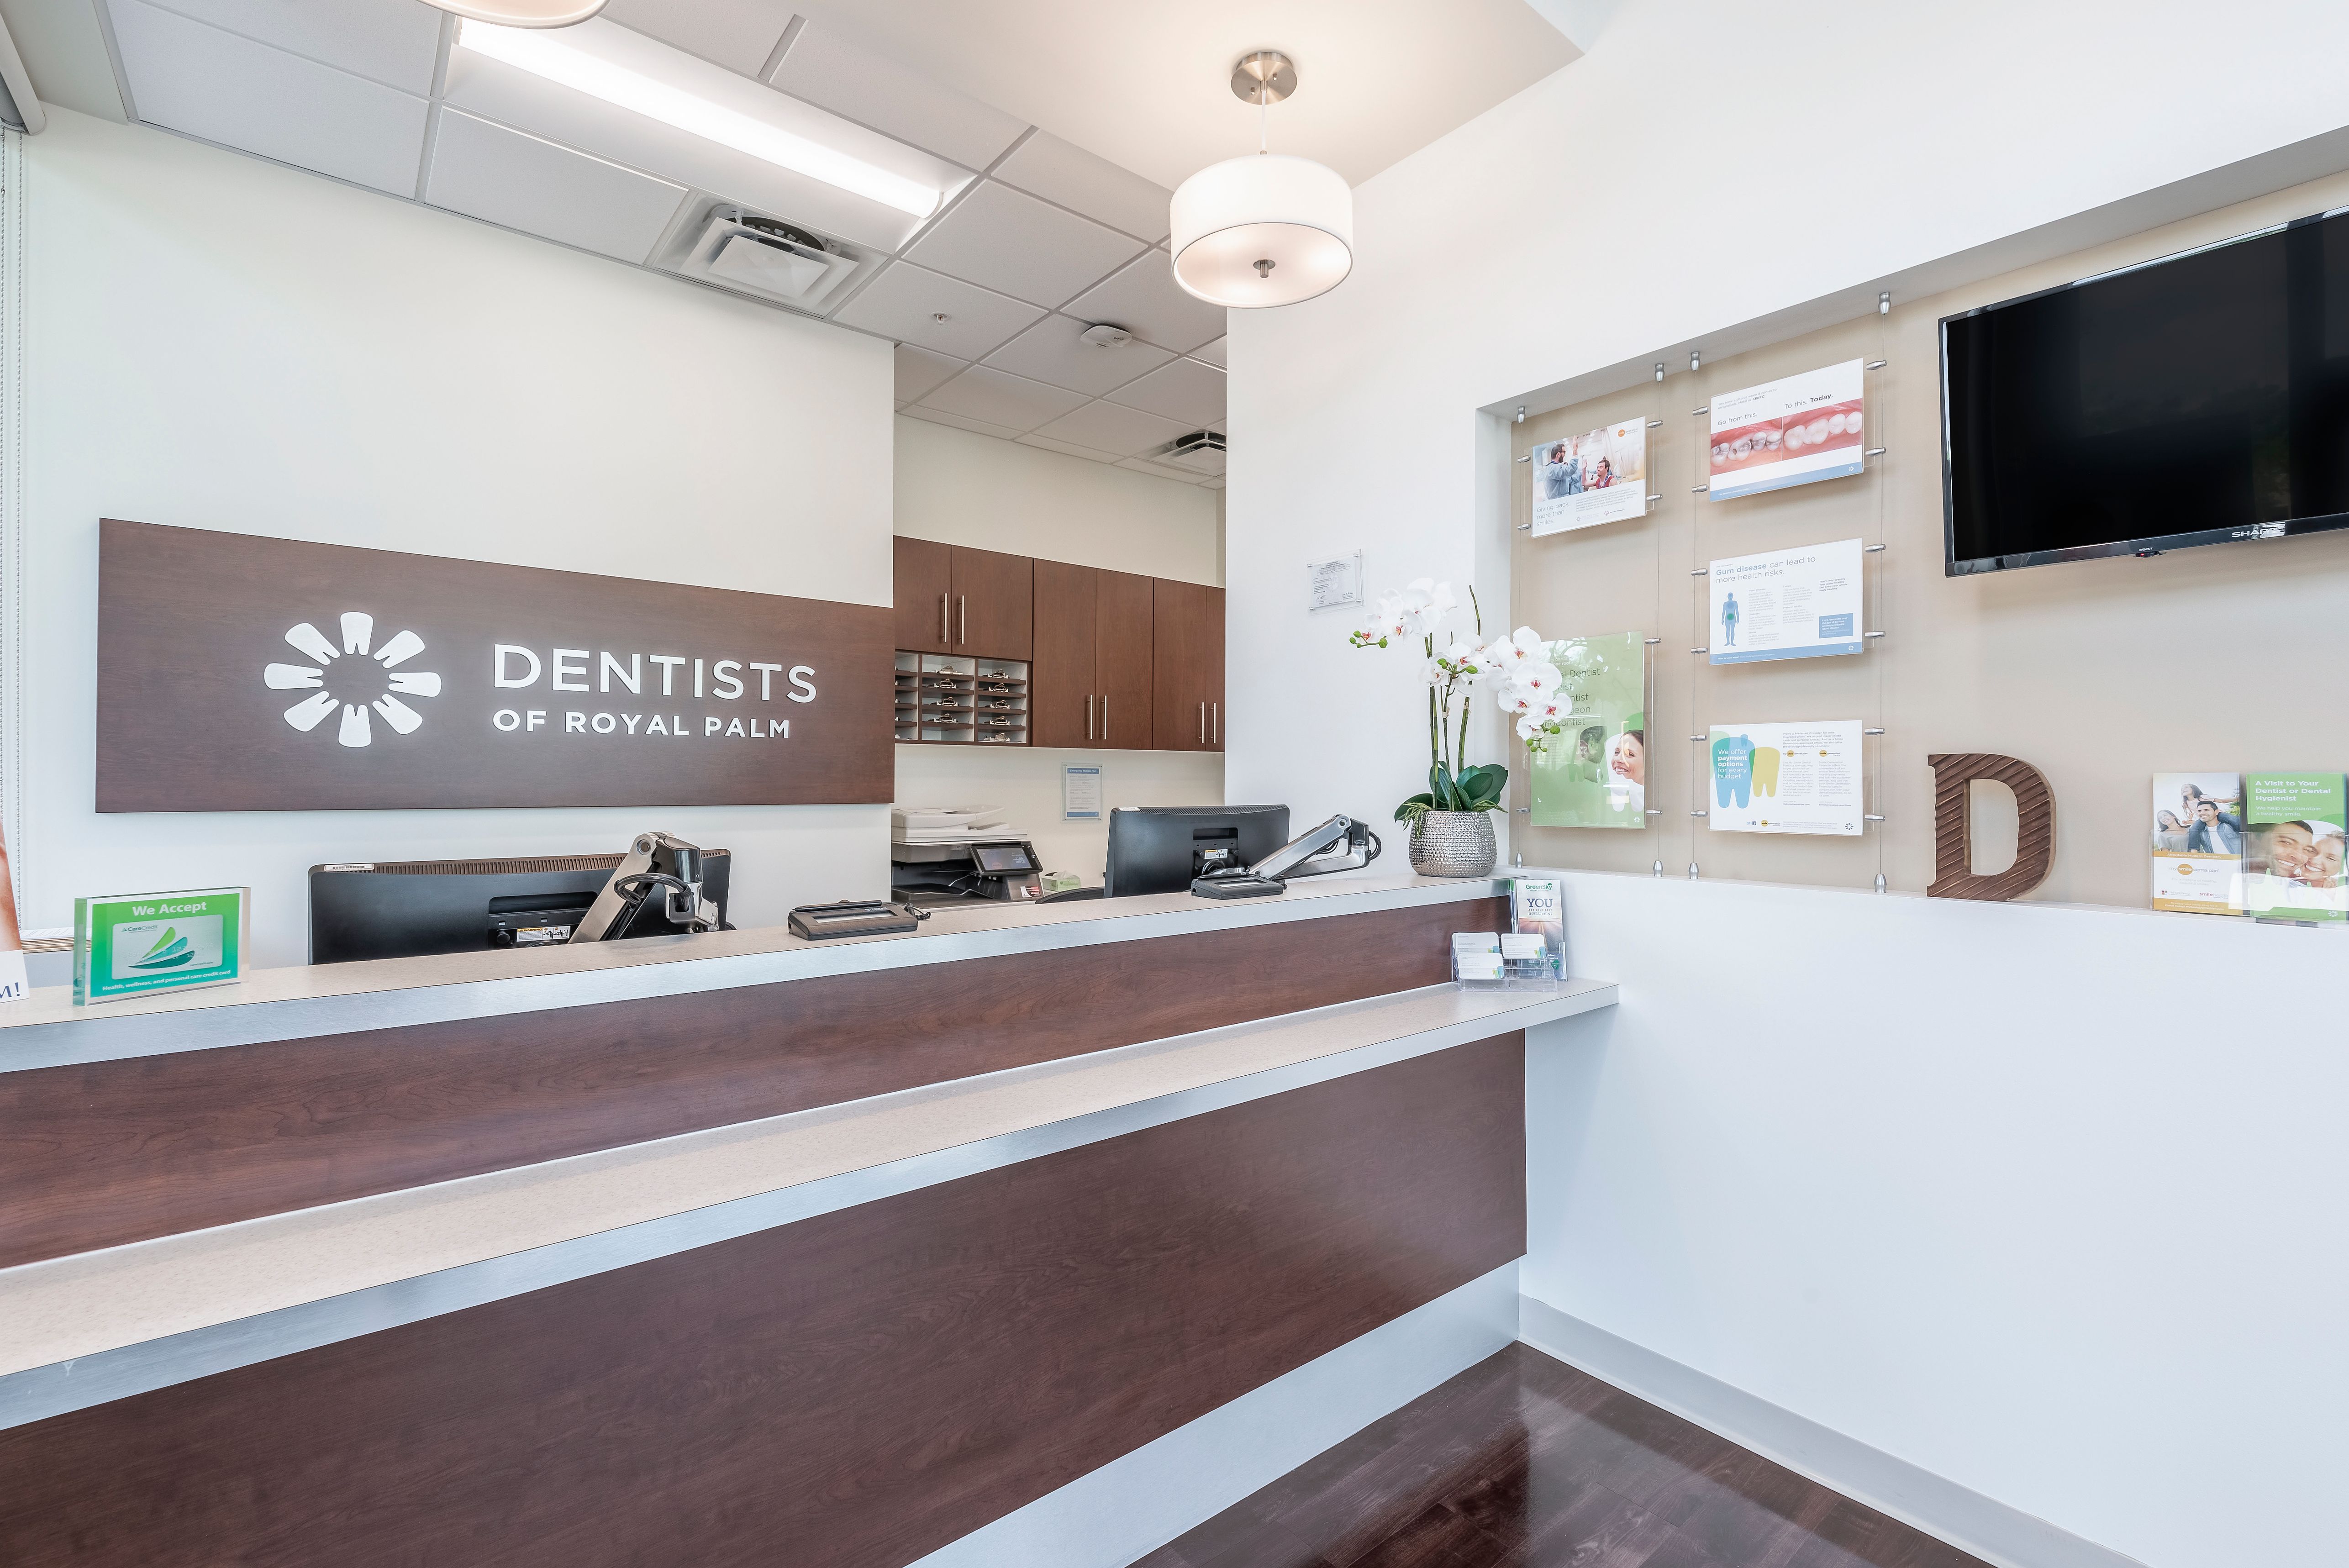 Dentists of Royal Palm opened its doors to the Royal Palm Beach community in August 2019!